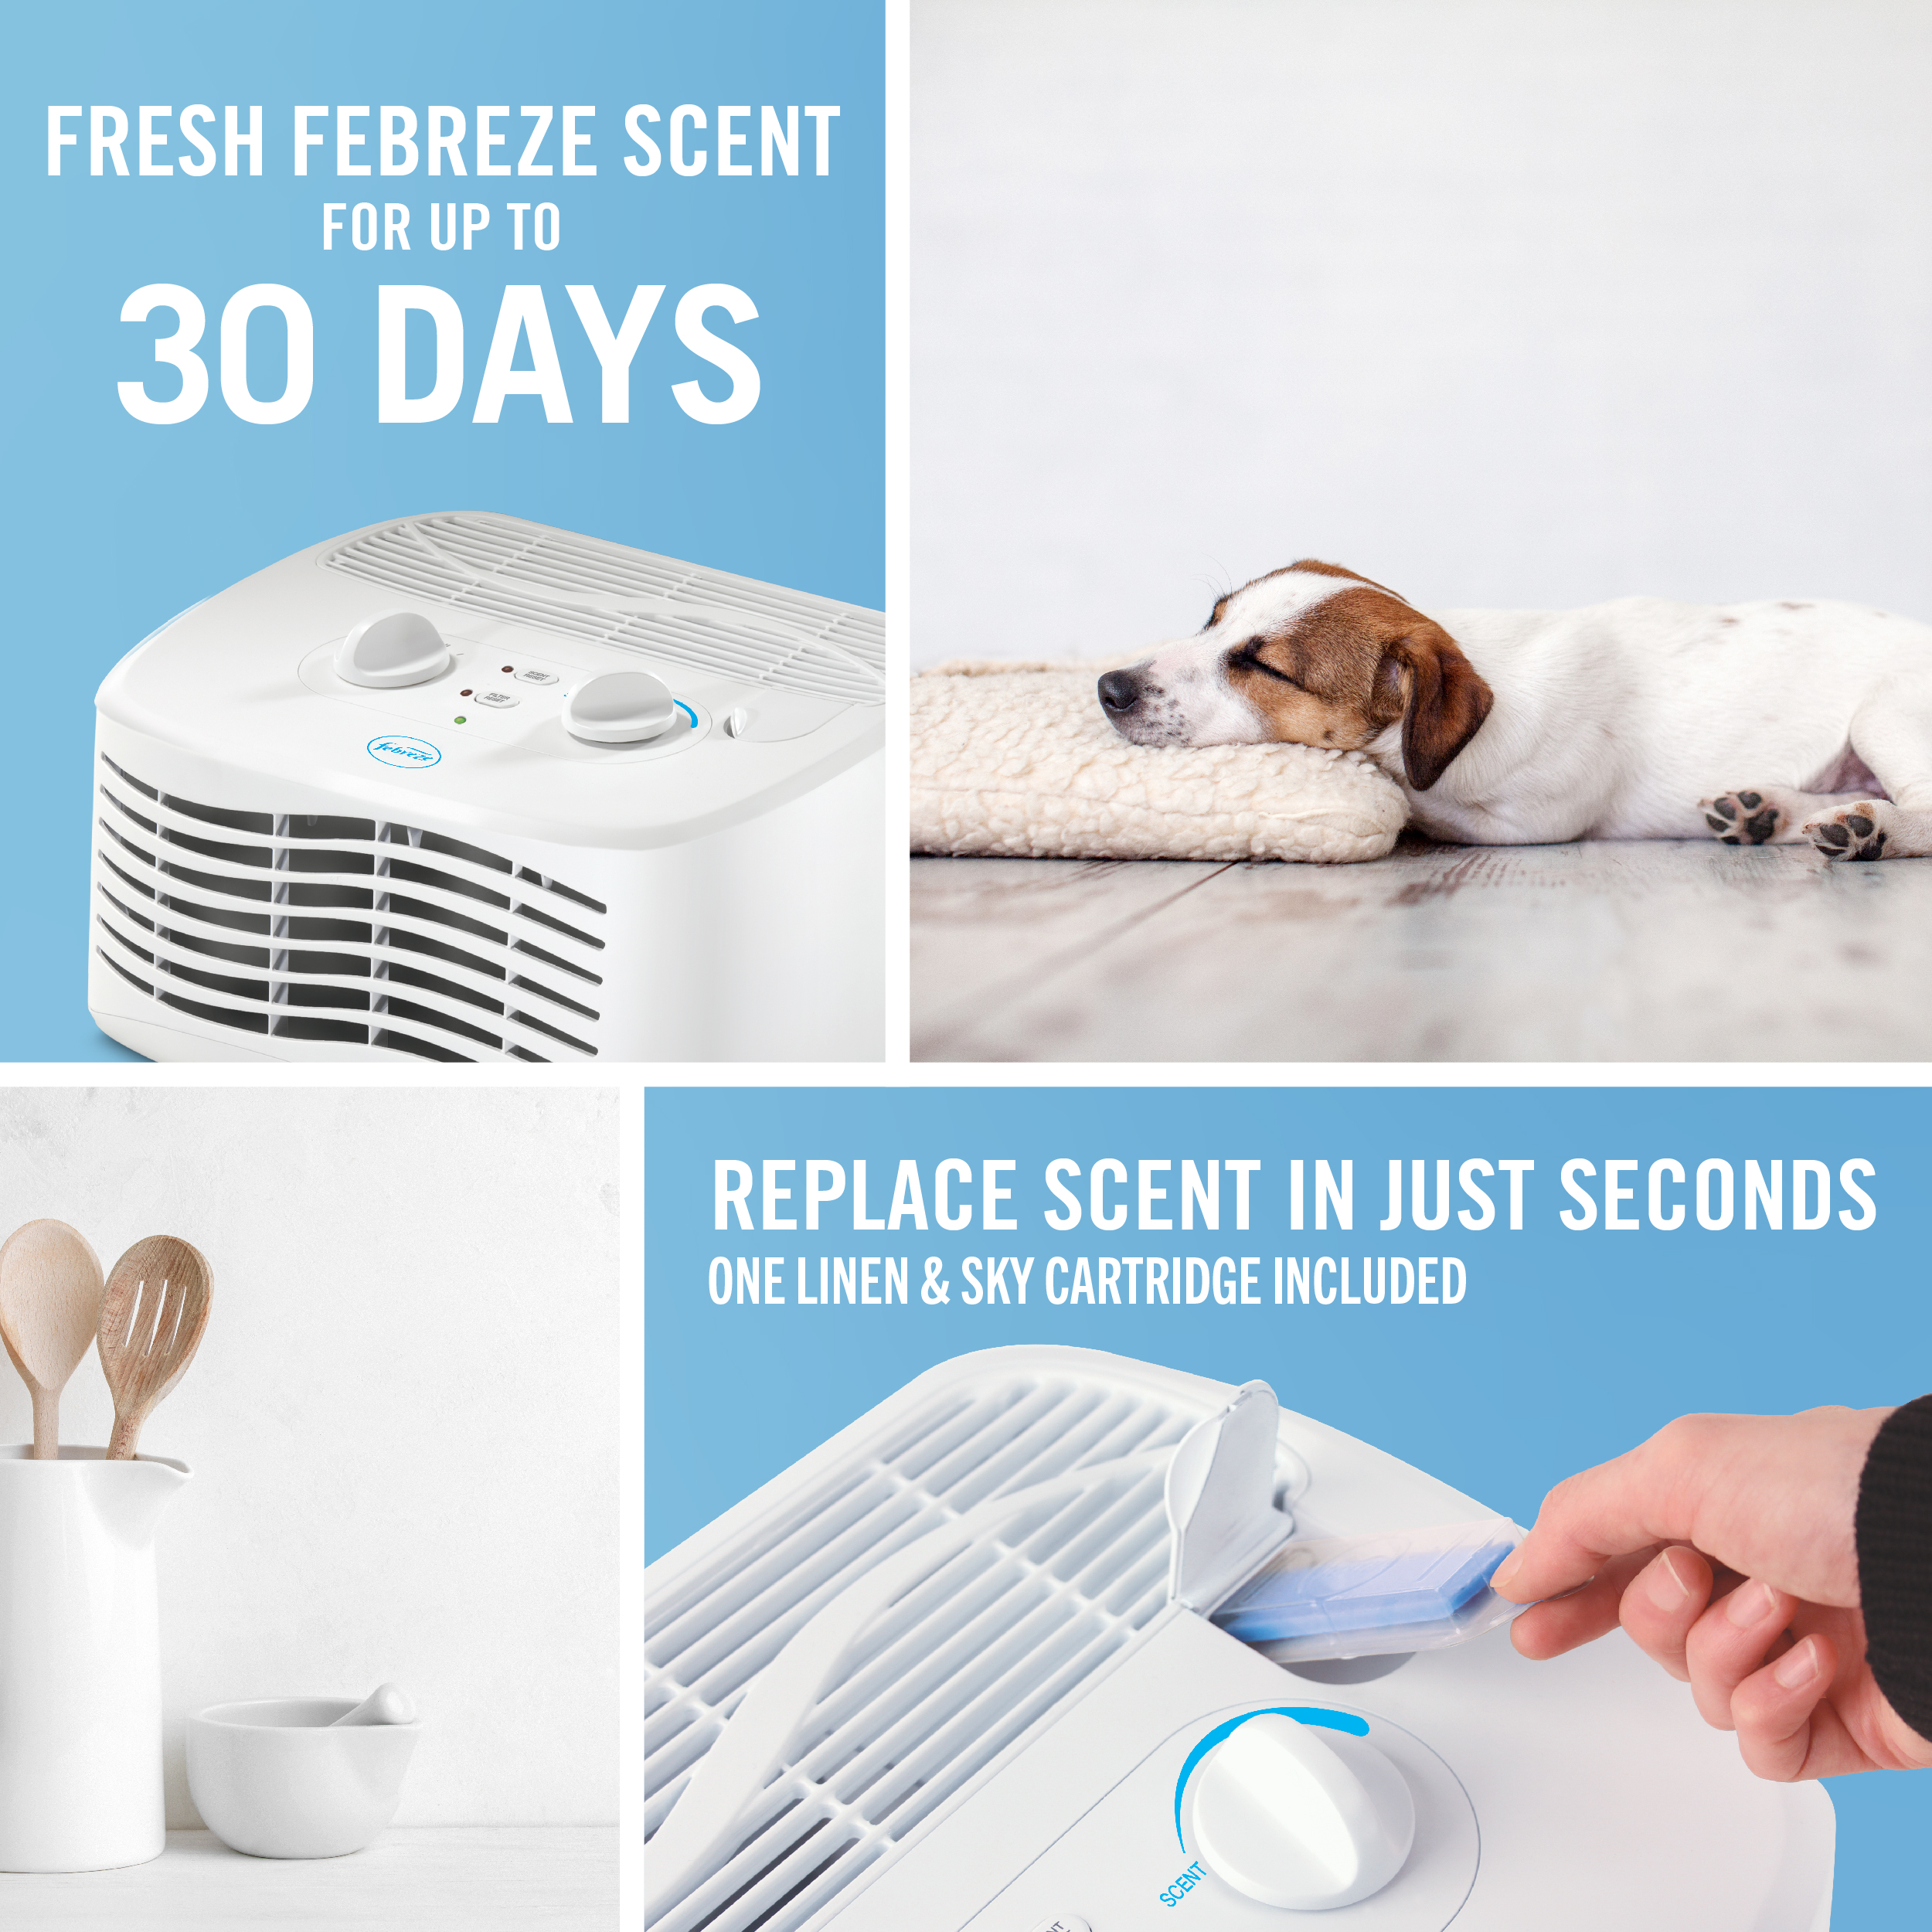 Febreze Tabletop HEPA-Type Air Purifier FHT170W, White - image 4 of 12